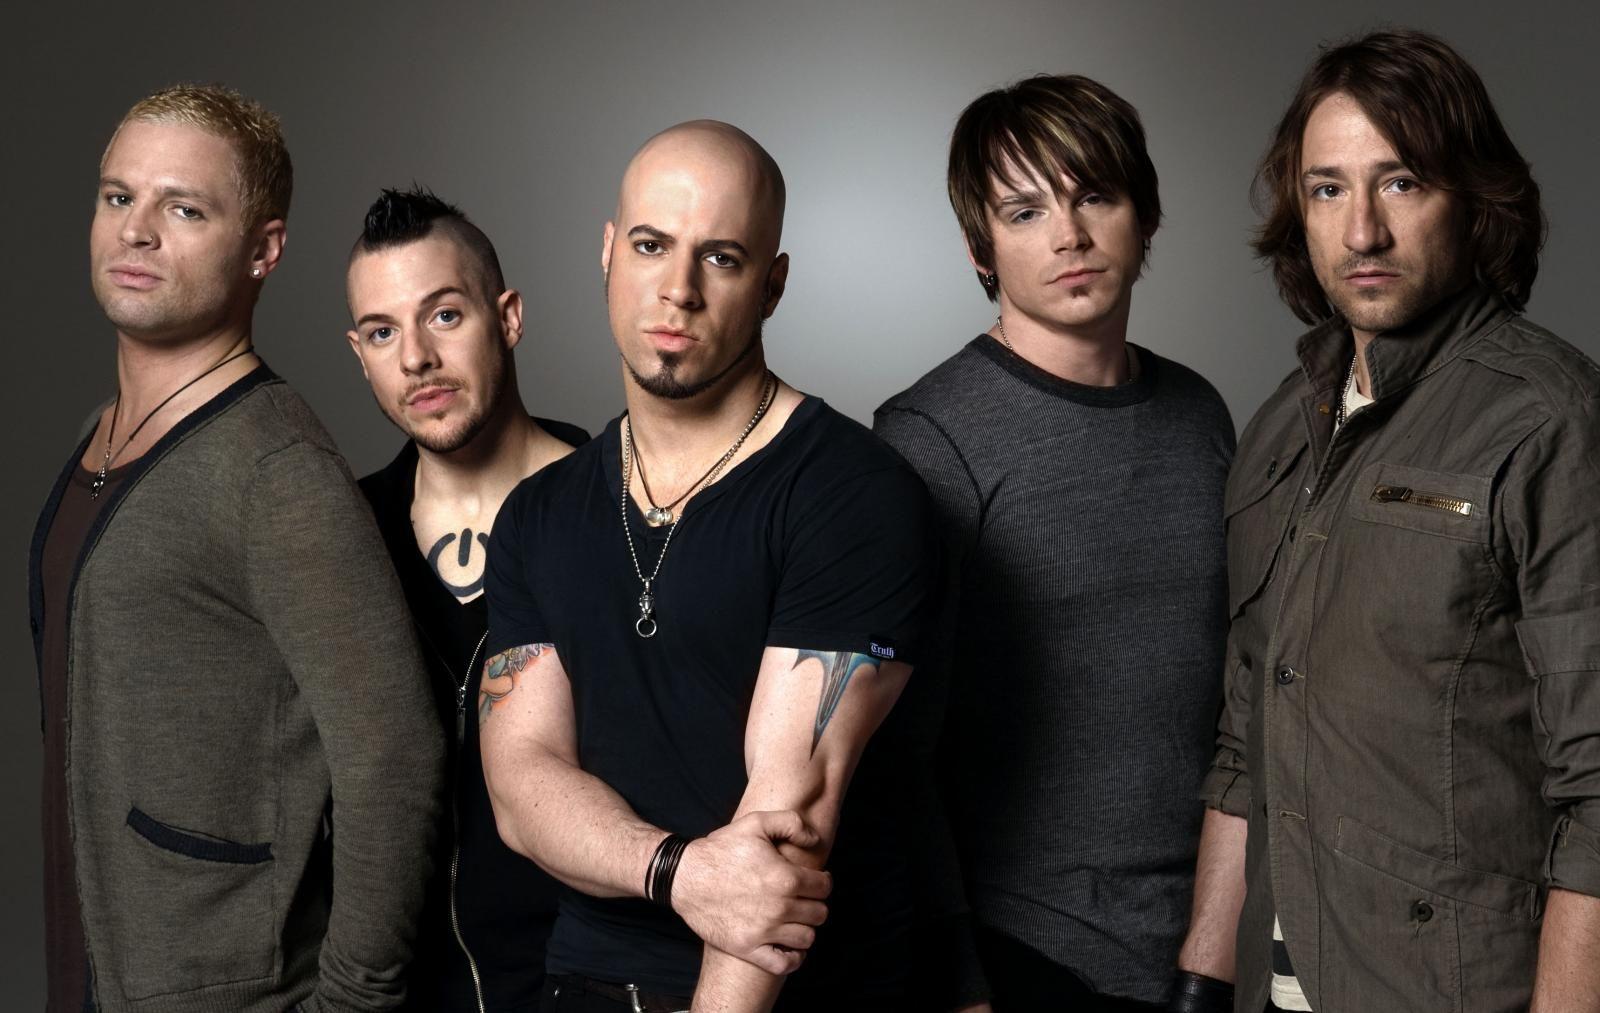 Daughtry Wallpaper, Daughtry Band Wallpaper And Desktop Background